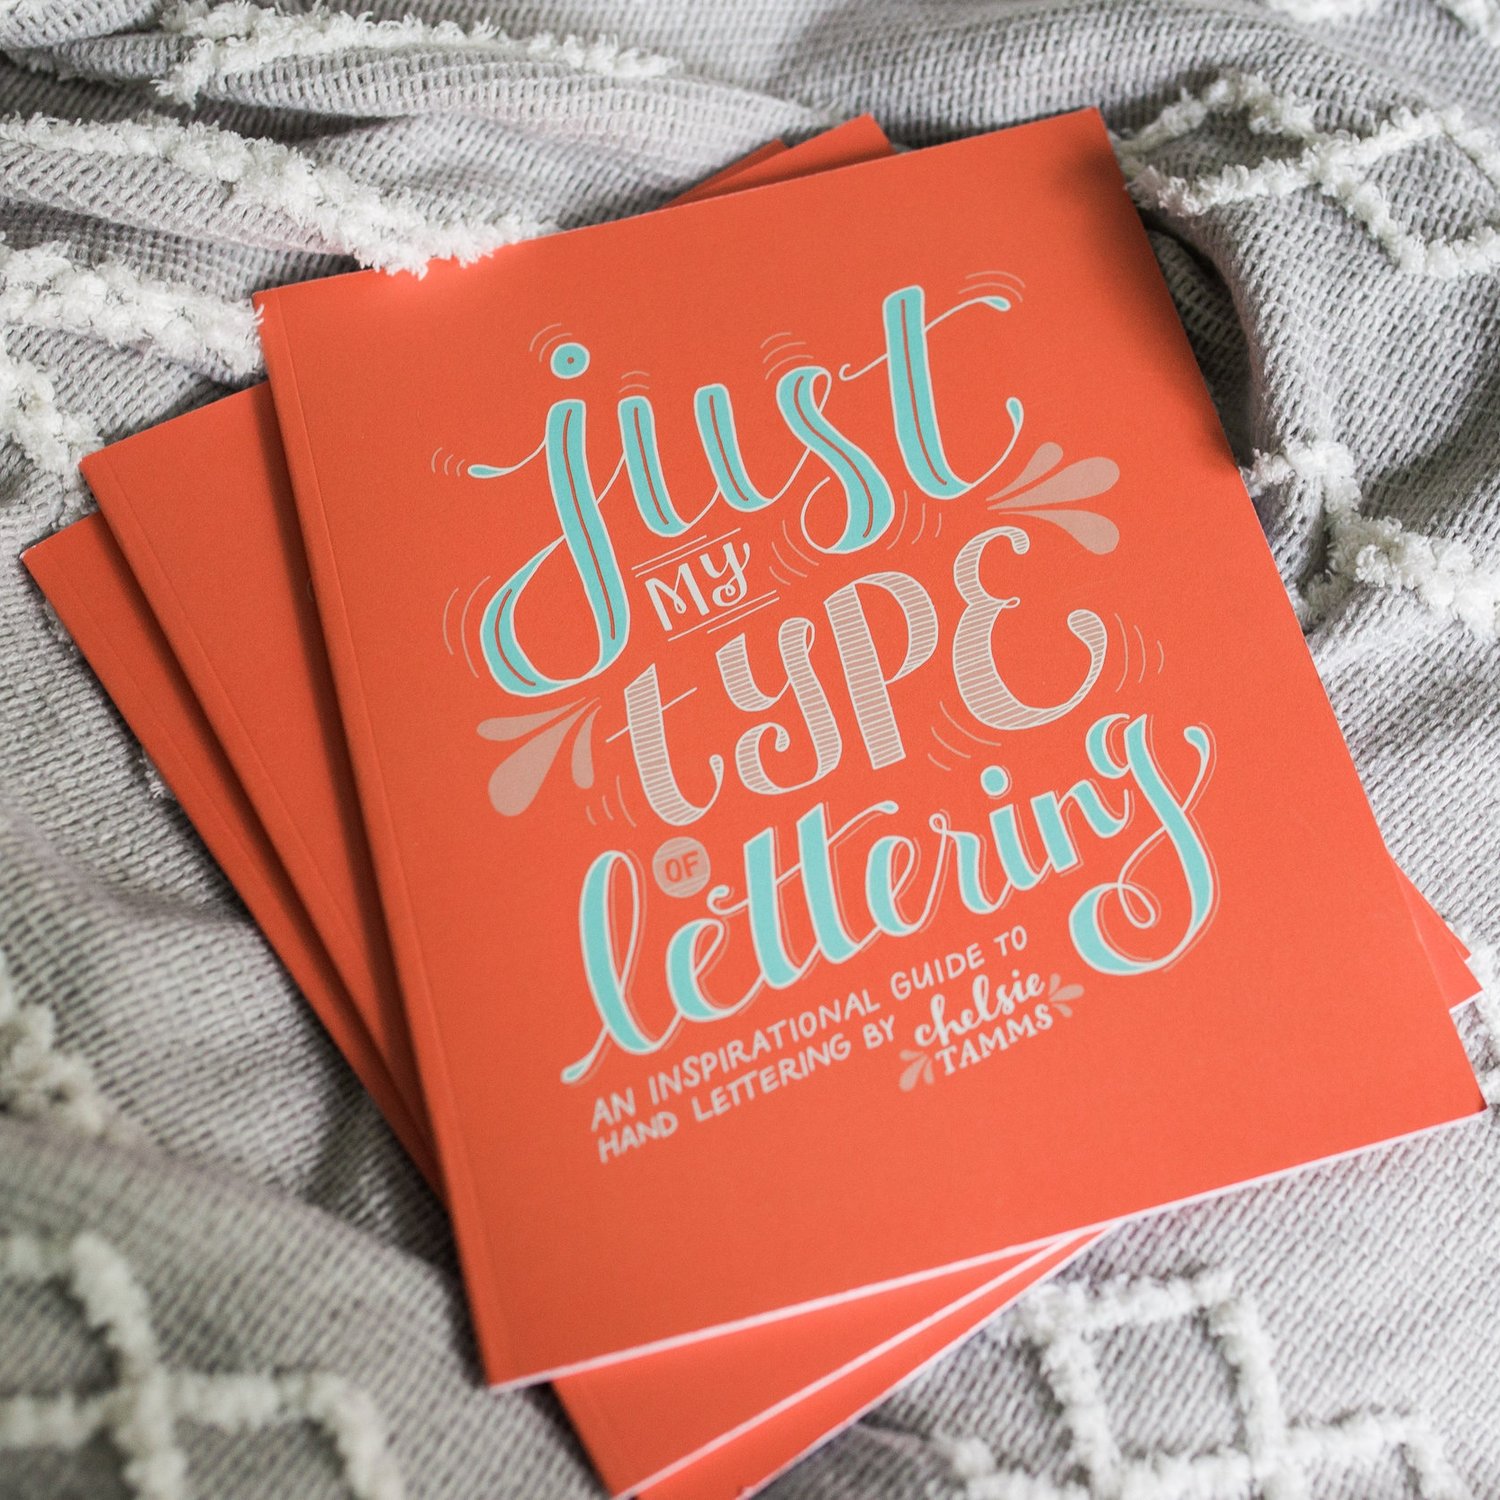 Just my Type of Lettering Book — Lettering Works